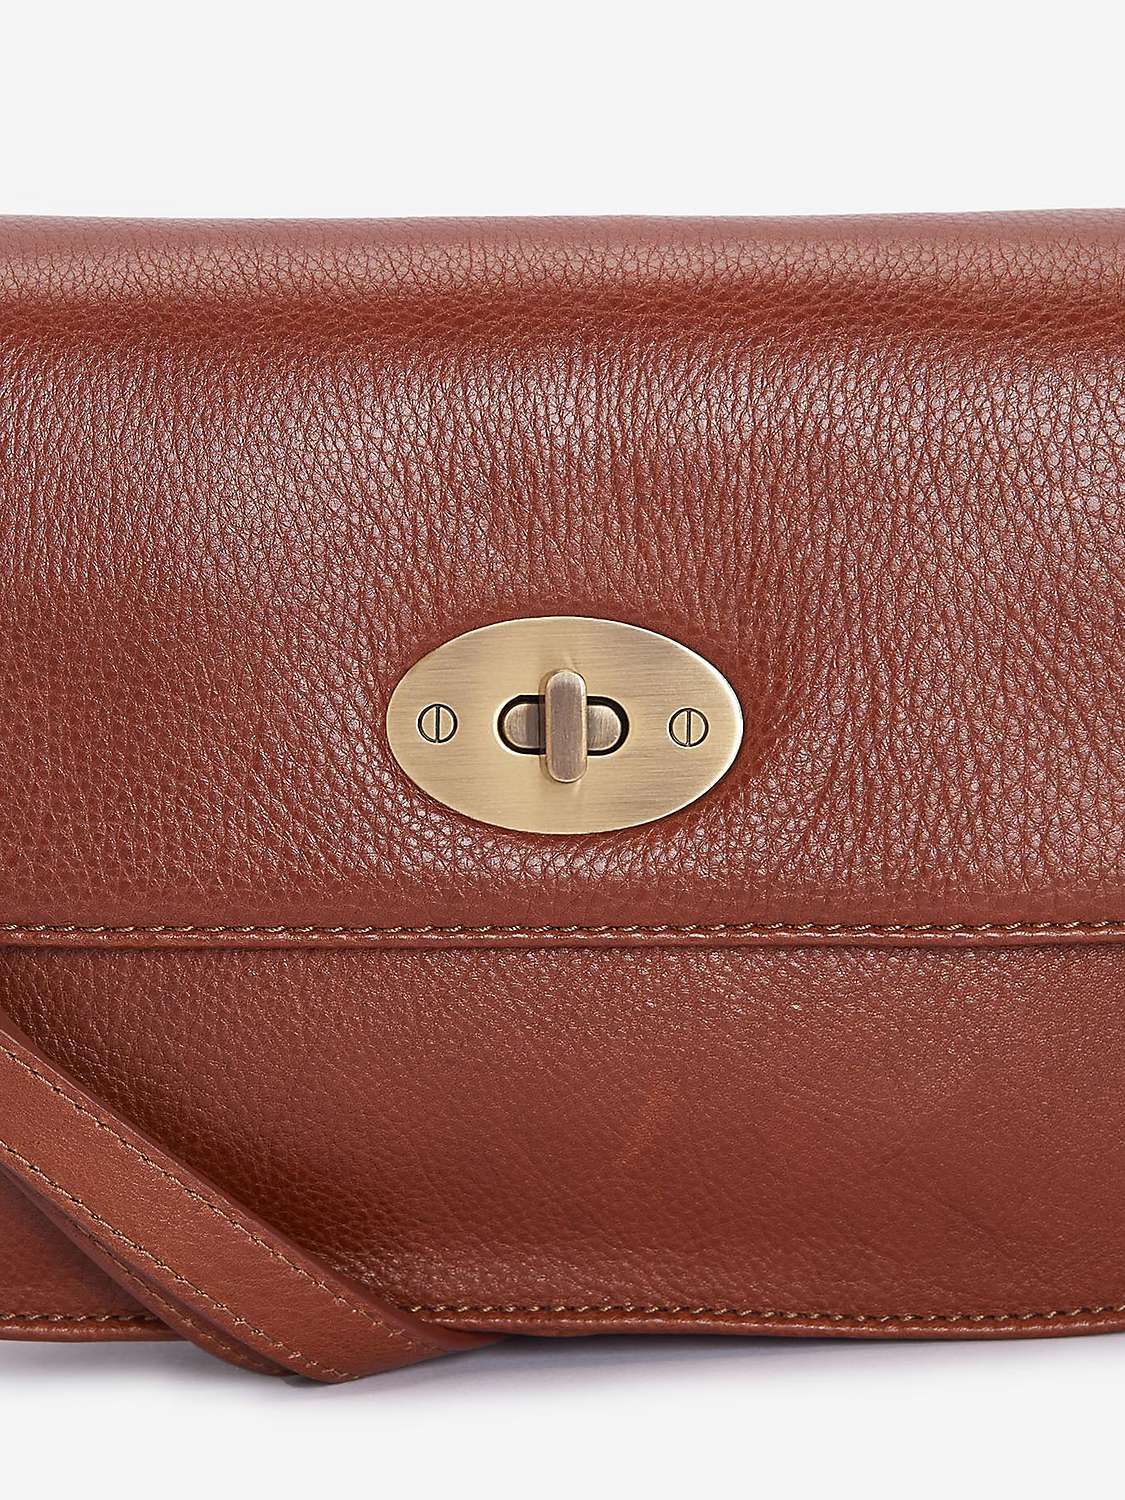 Buy Barbour Isla Leather Cross Body Bag, Brown Online at johnlewis.com